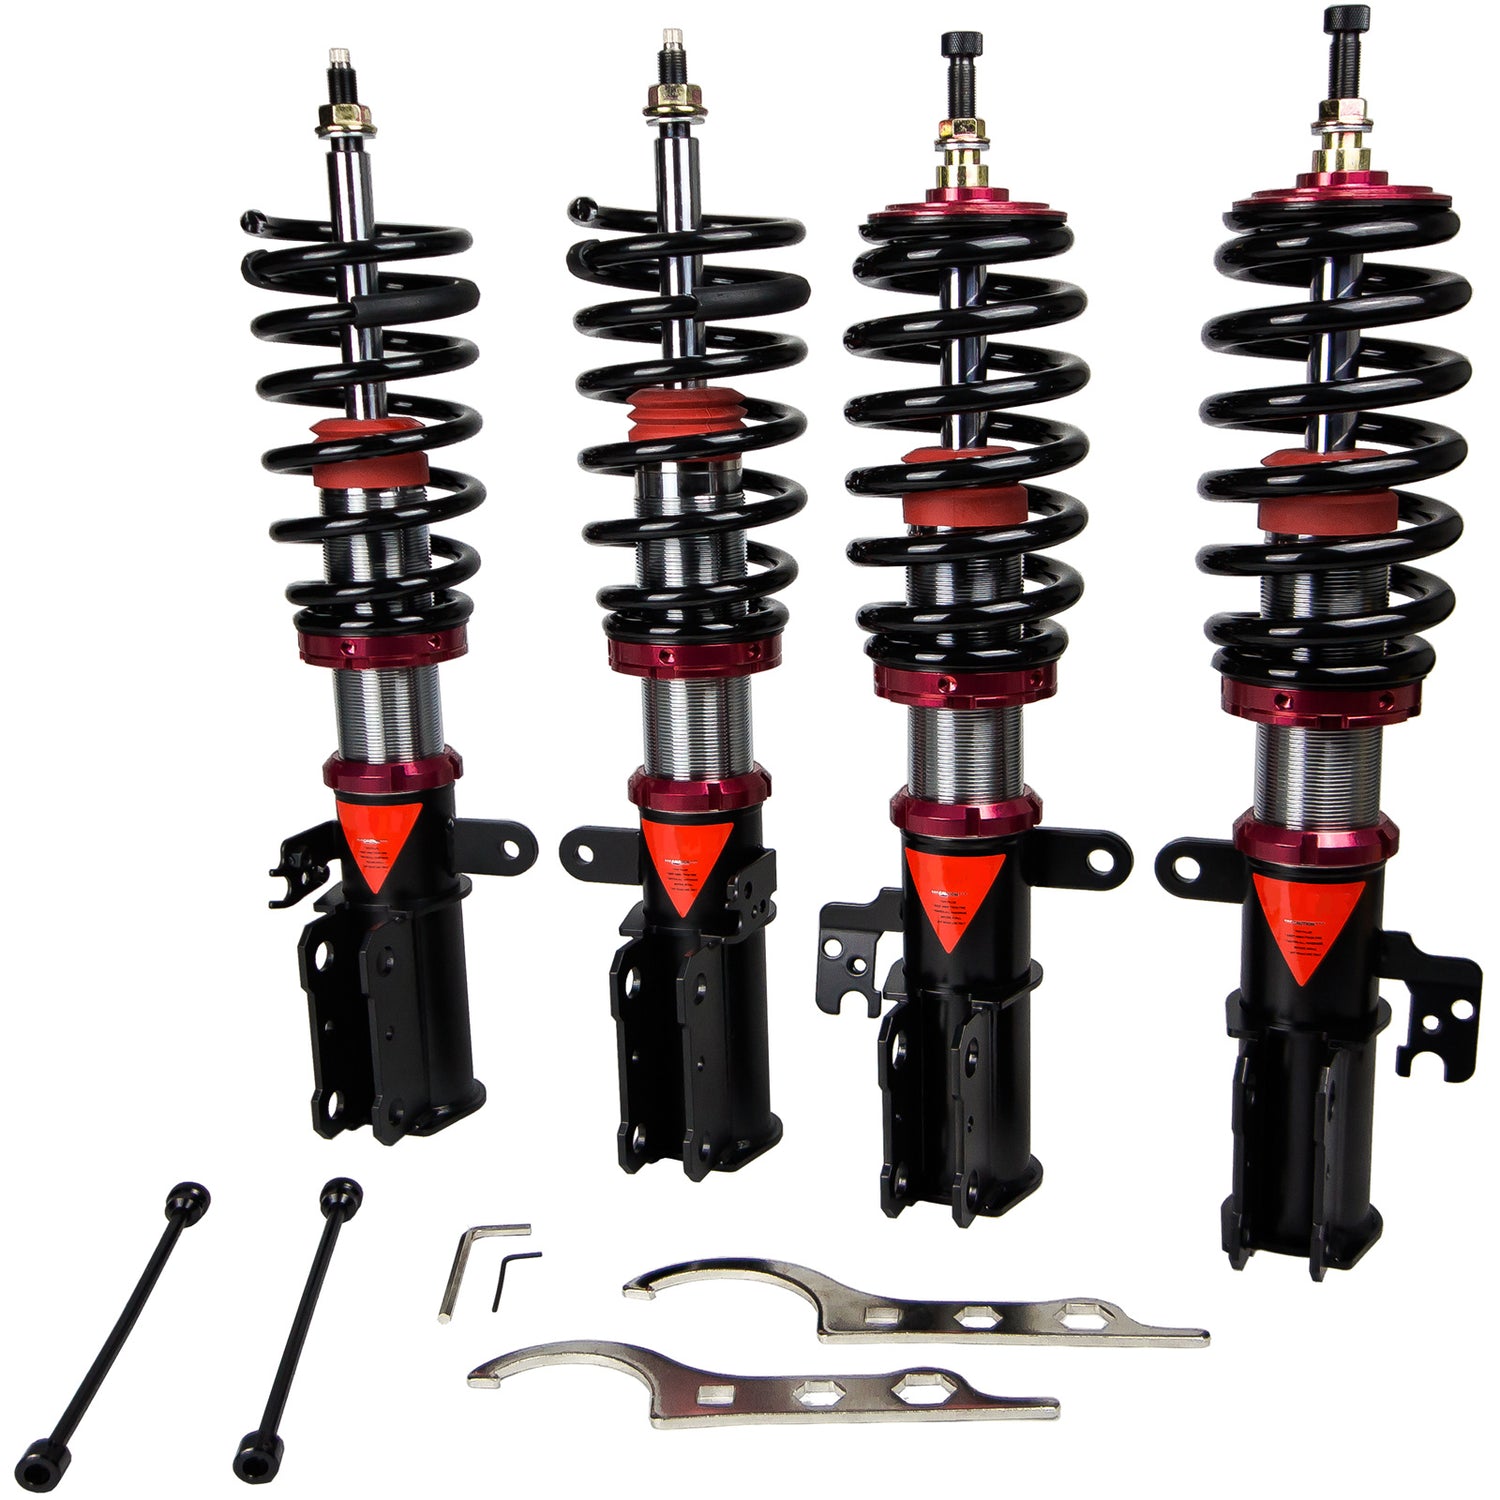 MMX3450-A MAXX Coilovers Lowering Kit, Fully Adjustable, Ride Height, 40 Clicks Rebound Settings, Toyota Camry(ACV30/MCV30) 02-06